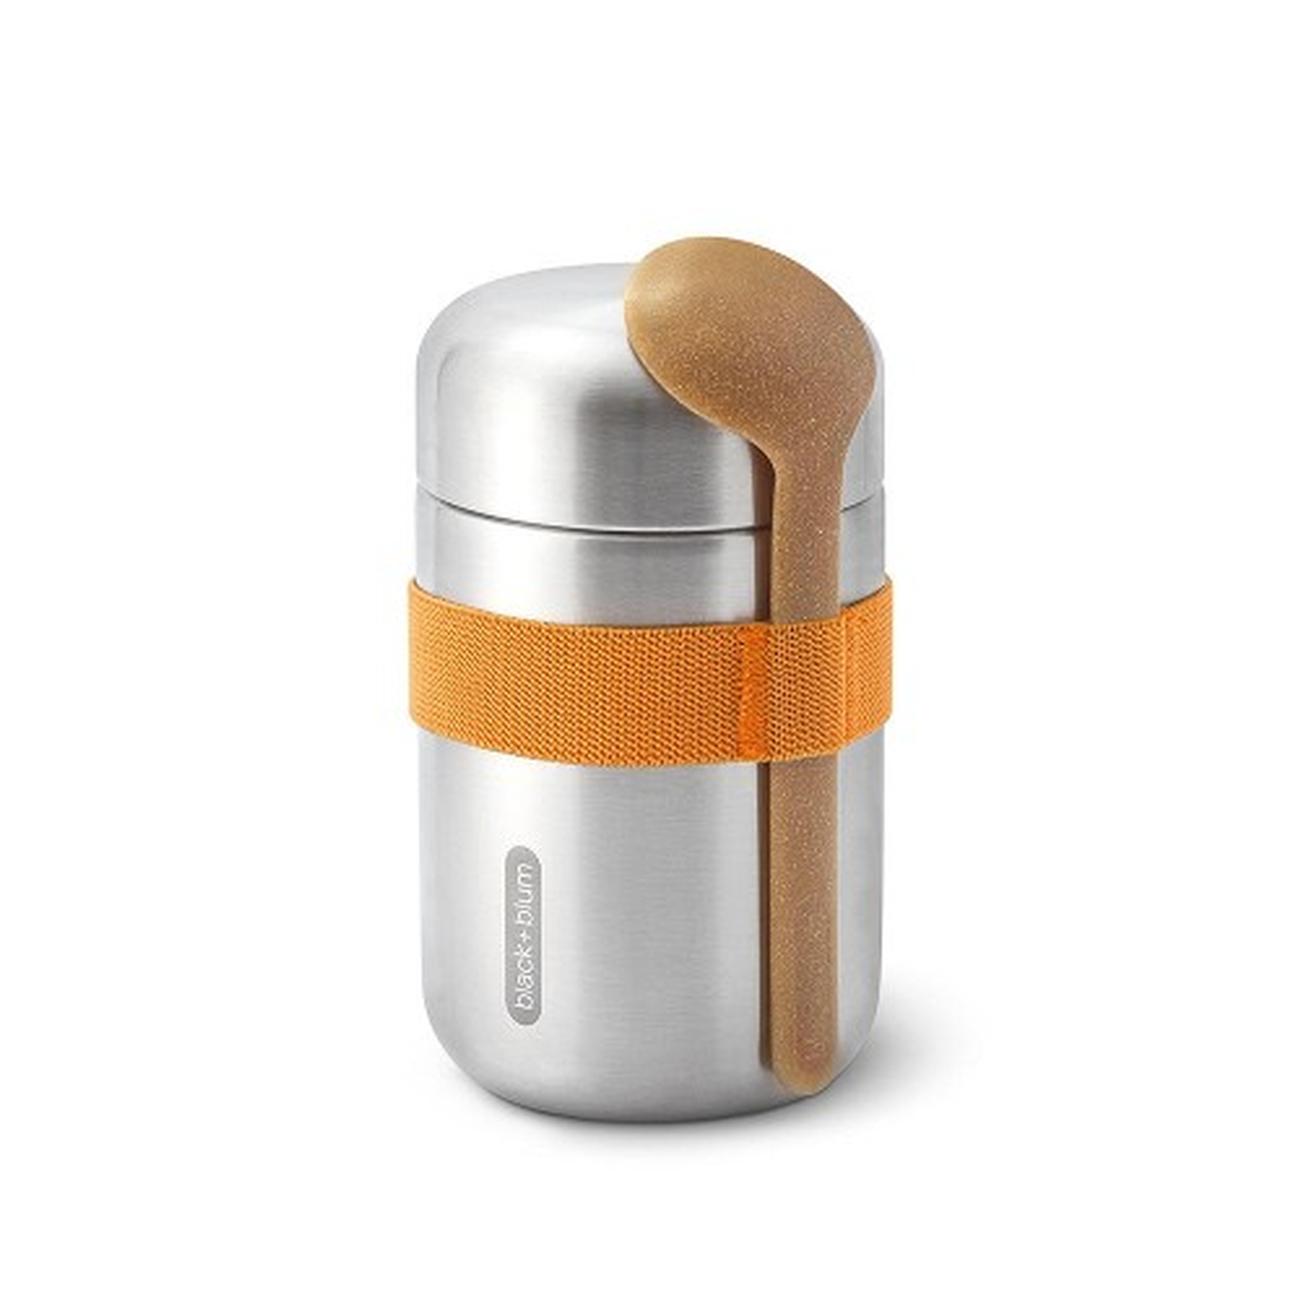 https://www.thekitchenwhisk.ie/contentFiles/productImages/Large/Black-and-Blum-Food-Flask-and-Spoon-Stainless-Steel-Orange.jpg